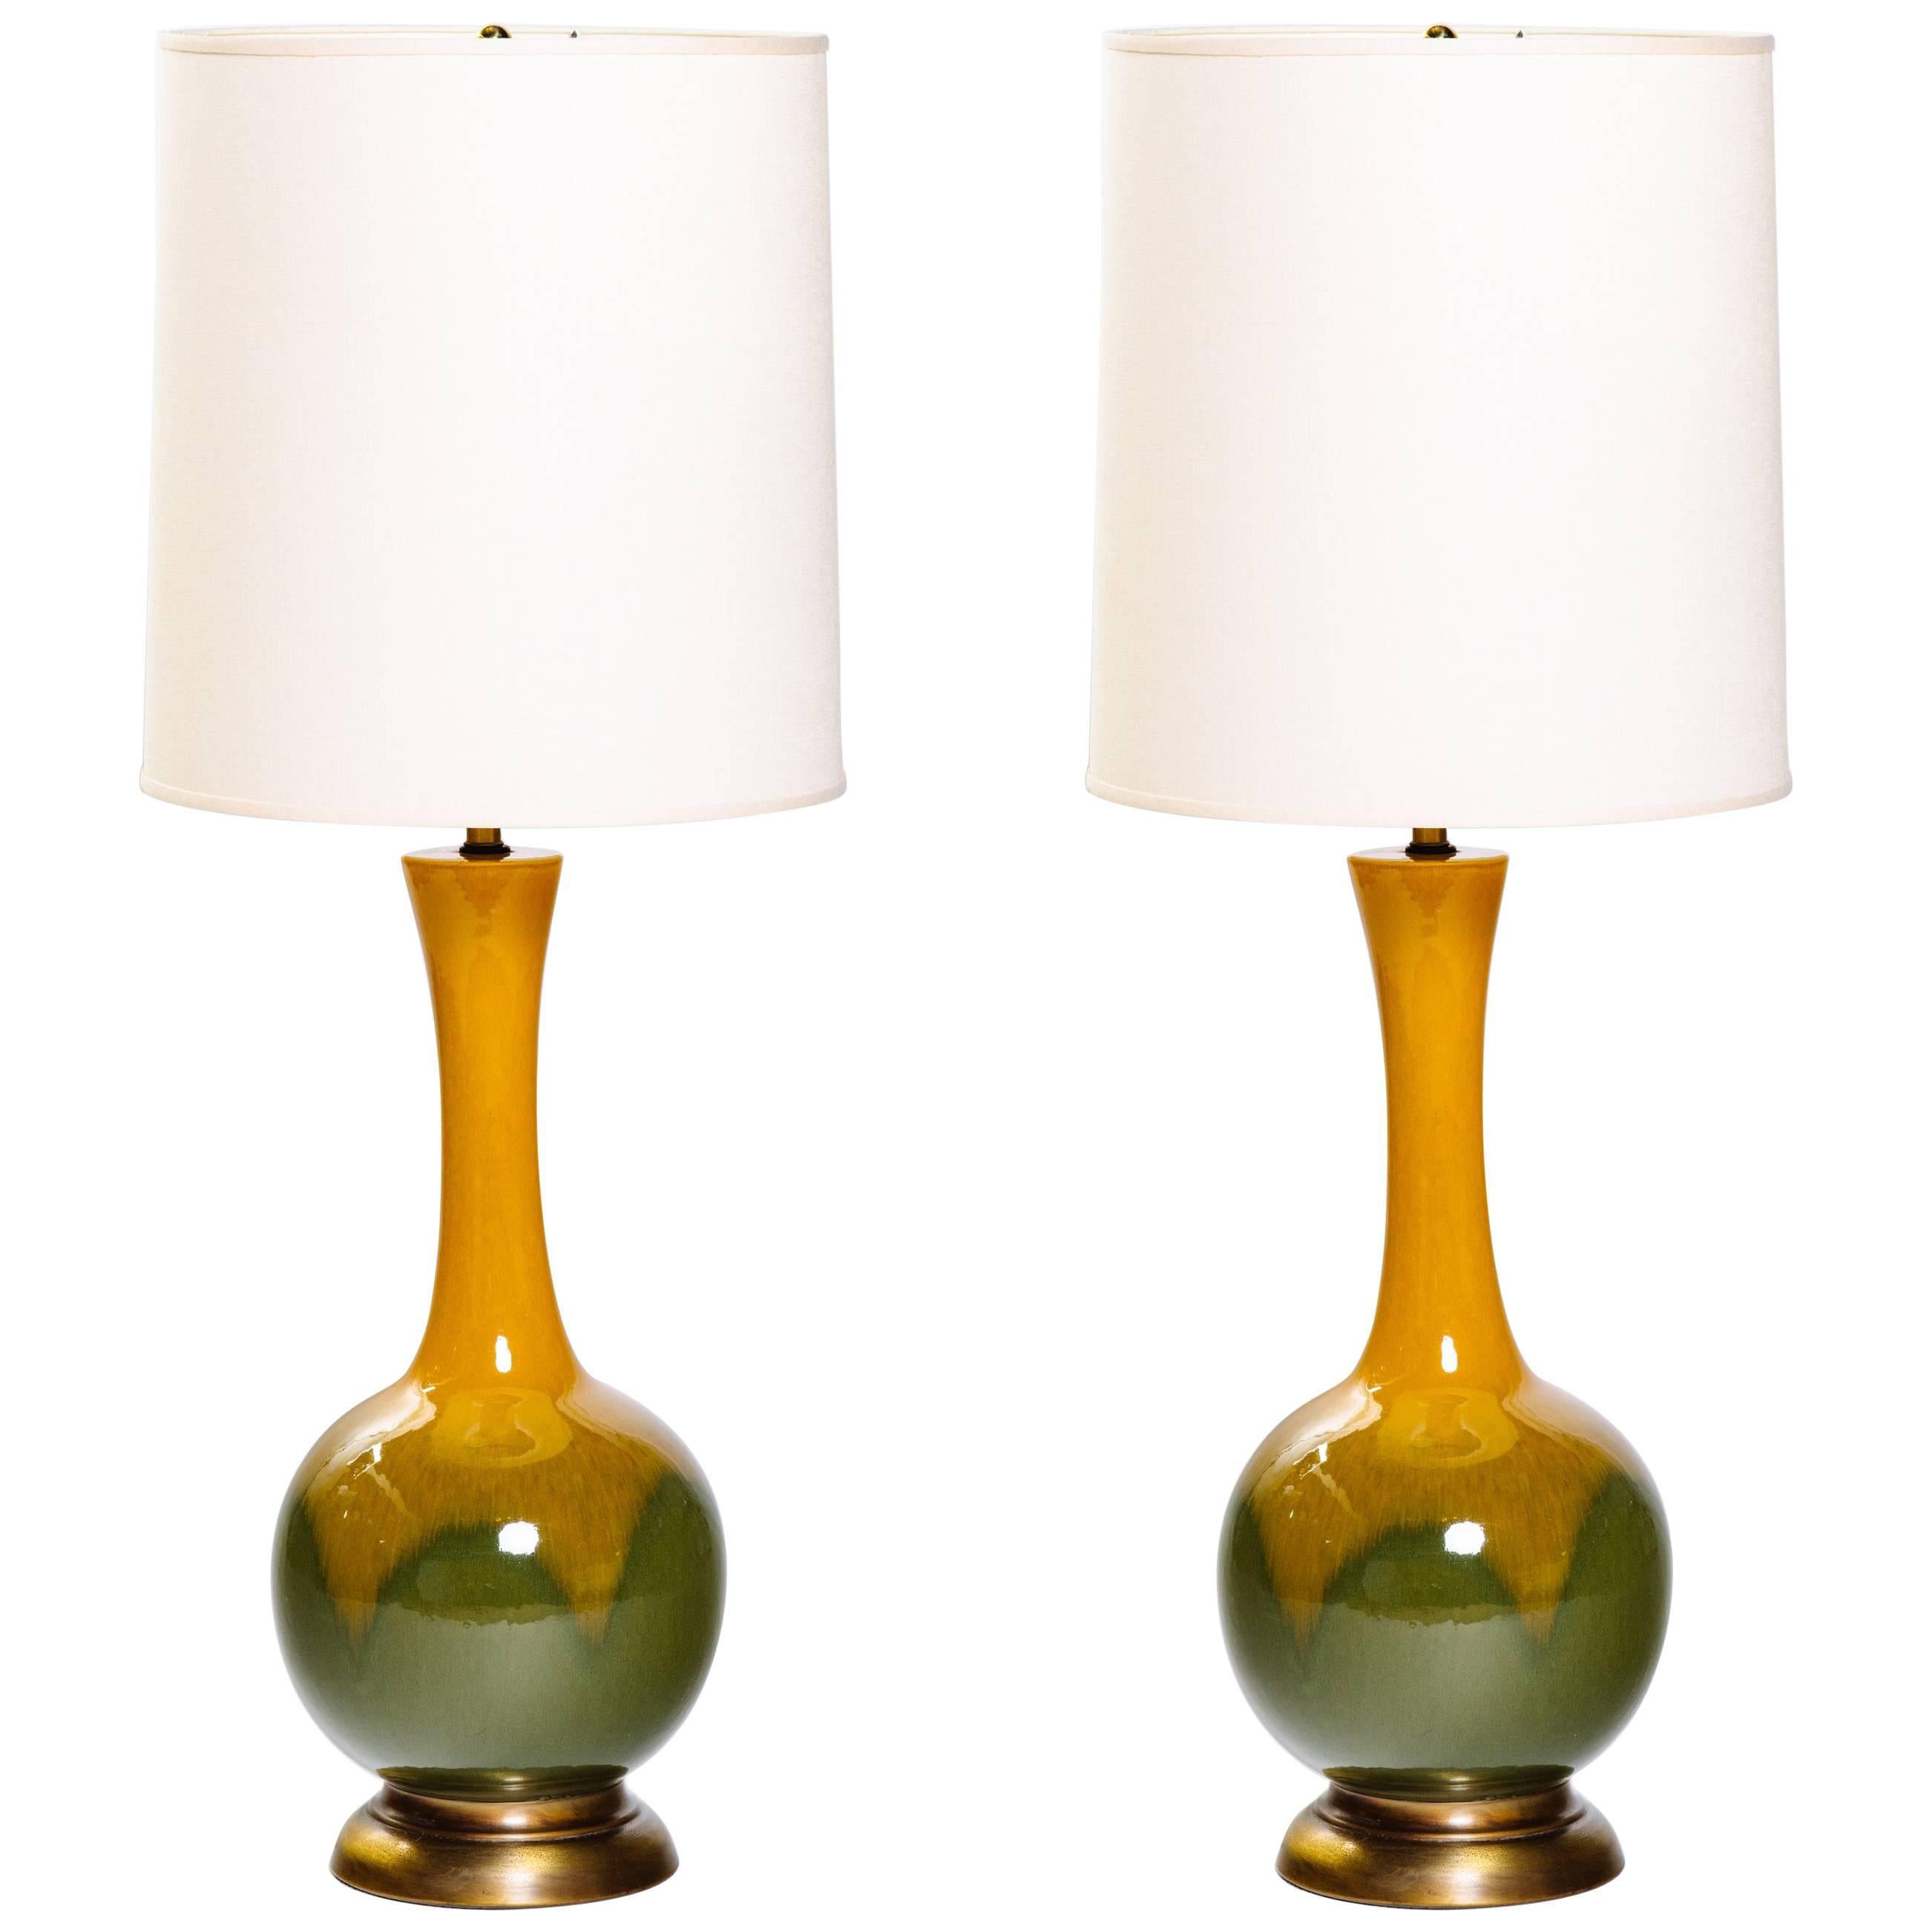 Gorgeous pair of tall ceramic pottery lamps with bulbous form and long neck design. The lamps have a glazed finish in gradient hues of mustard yellow and green moss. Lamps have dark brass base and fittings. Shown with custom tall drum shades in